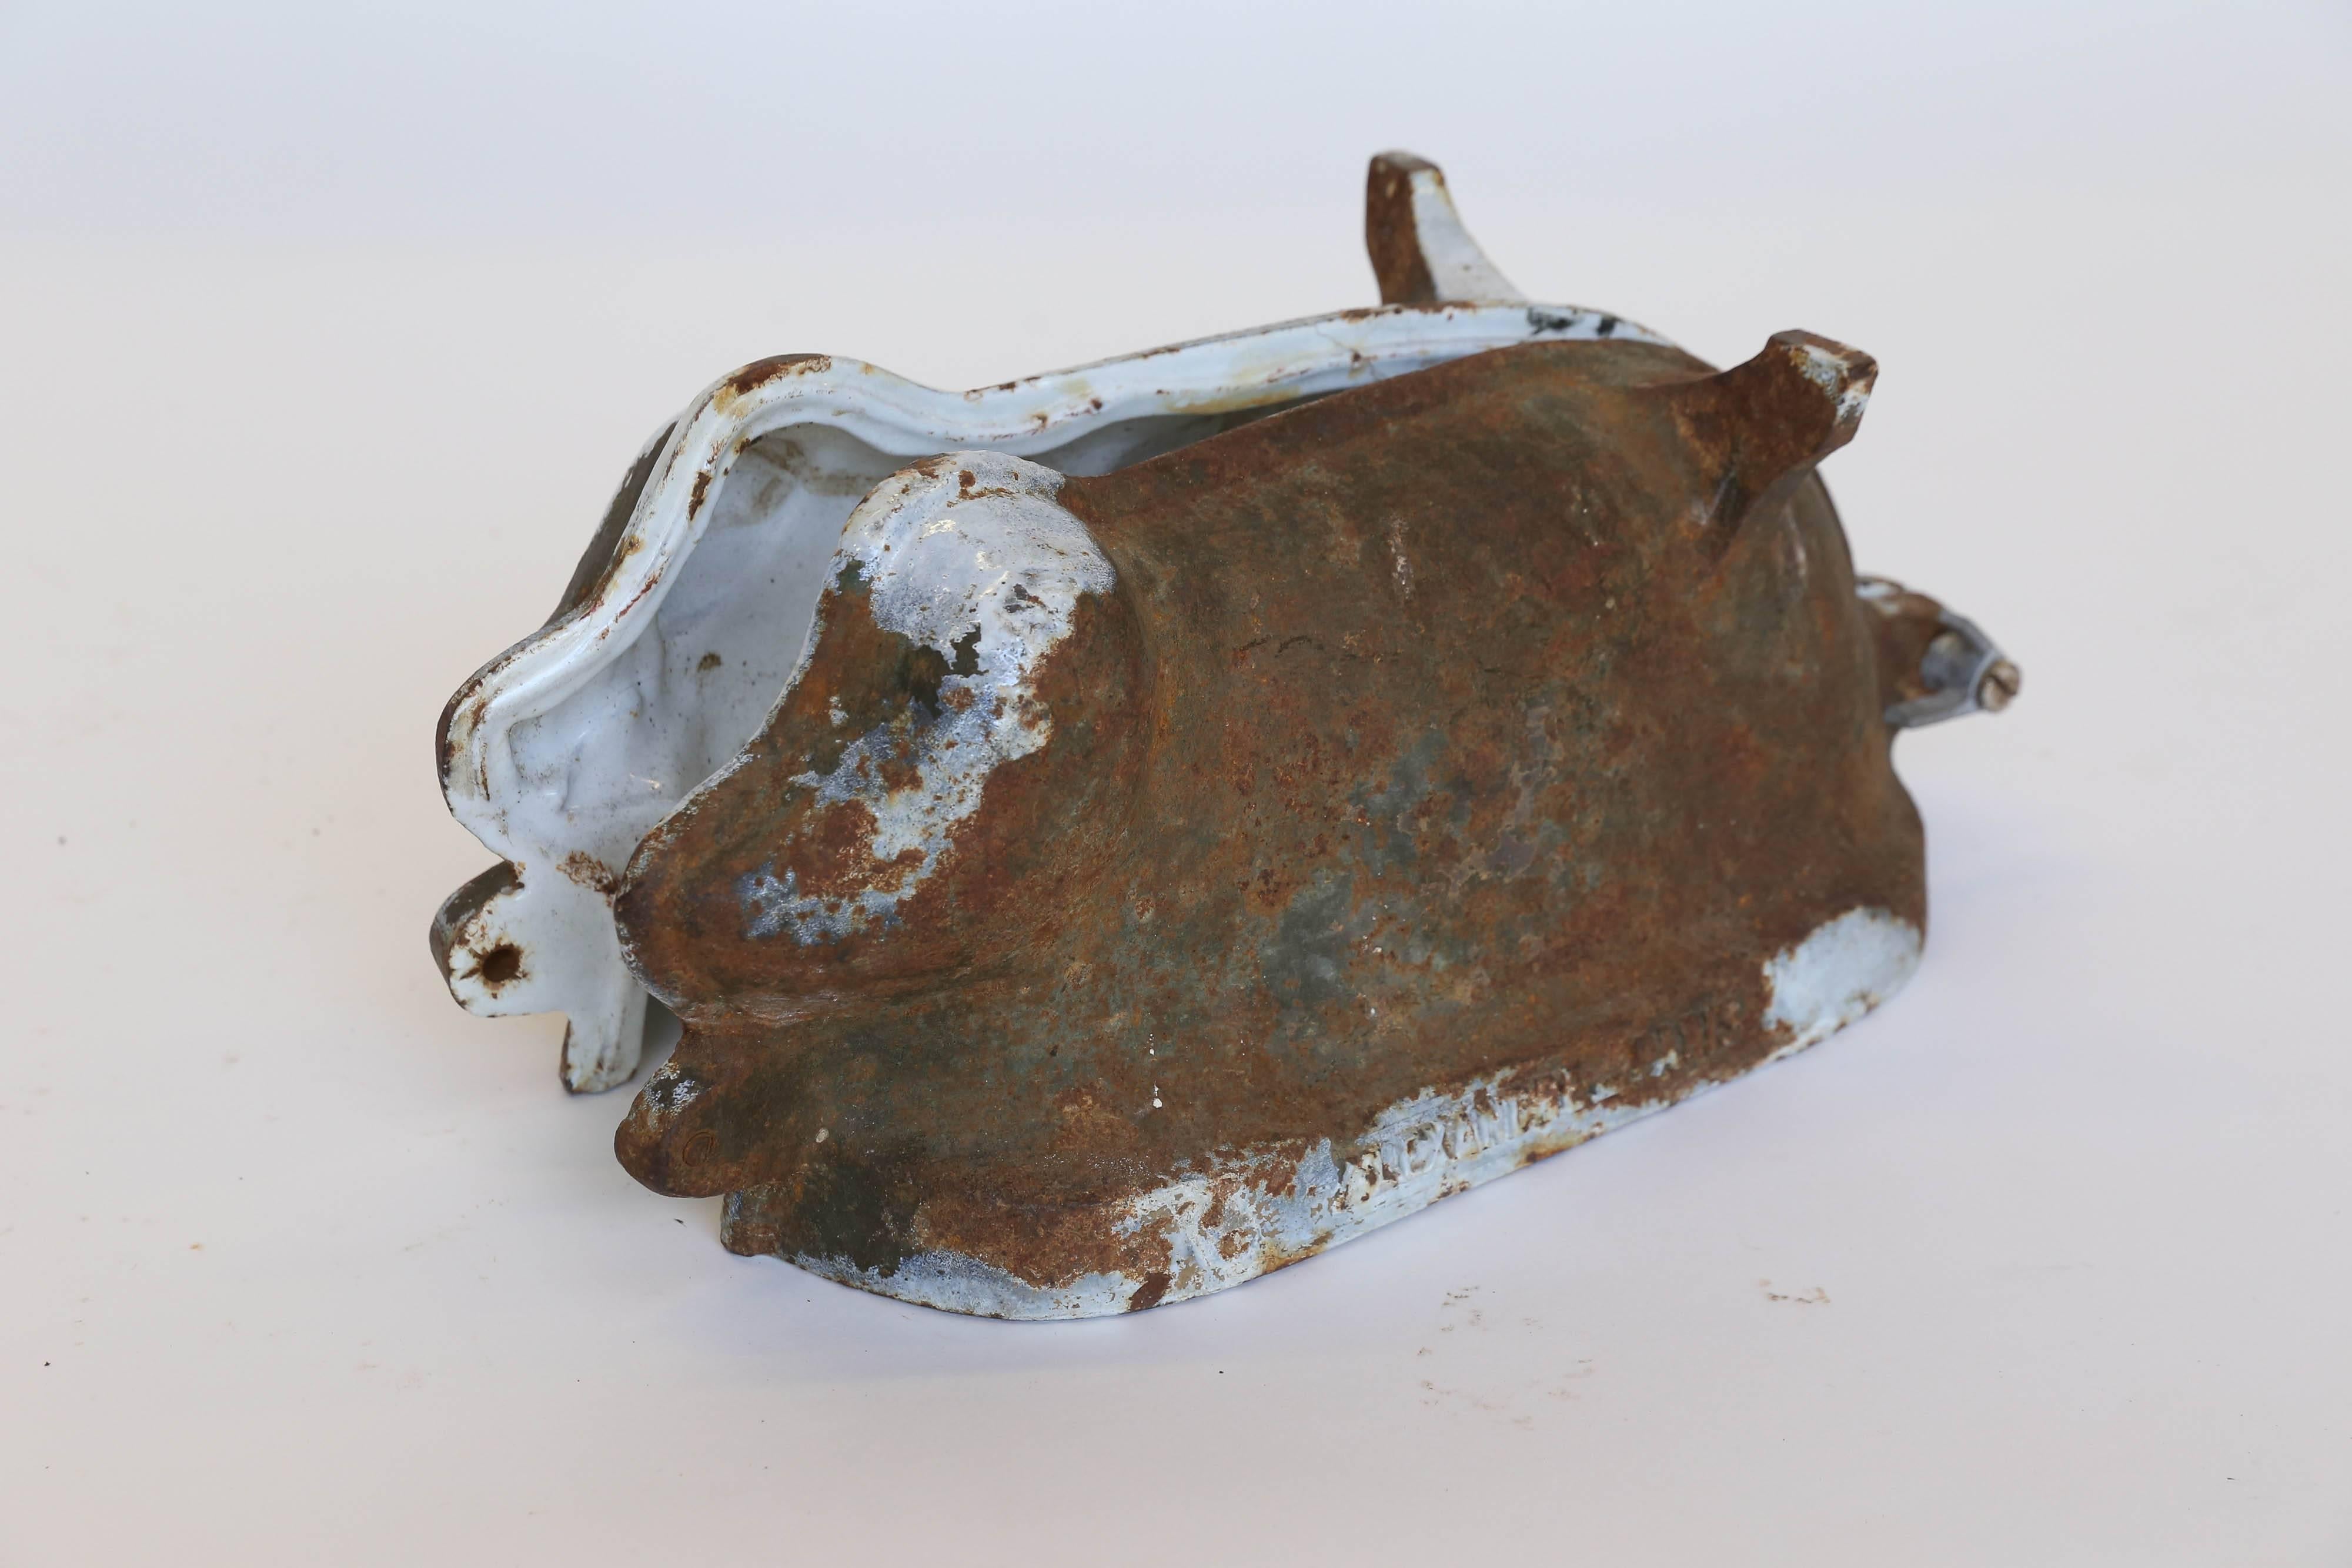 Found in France, a rare cast iron mold in the shape of a pig. The original baked-on white enamel finish is almost completely gone from the exterior surface but is largely intact inside. The two halves were originally held together by large bolts